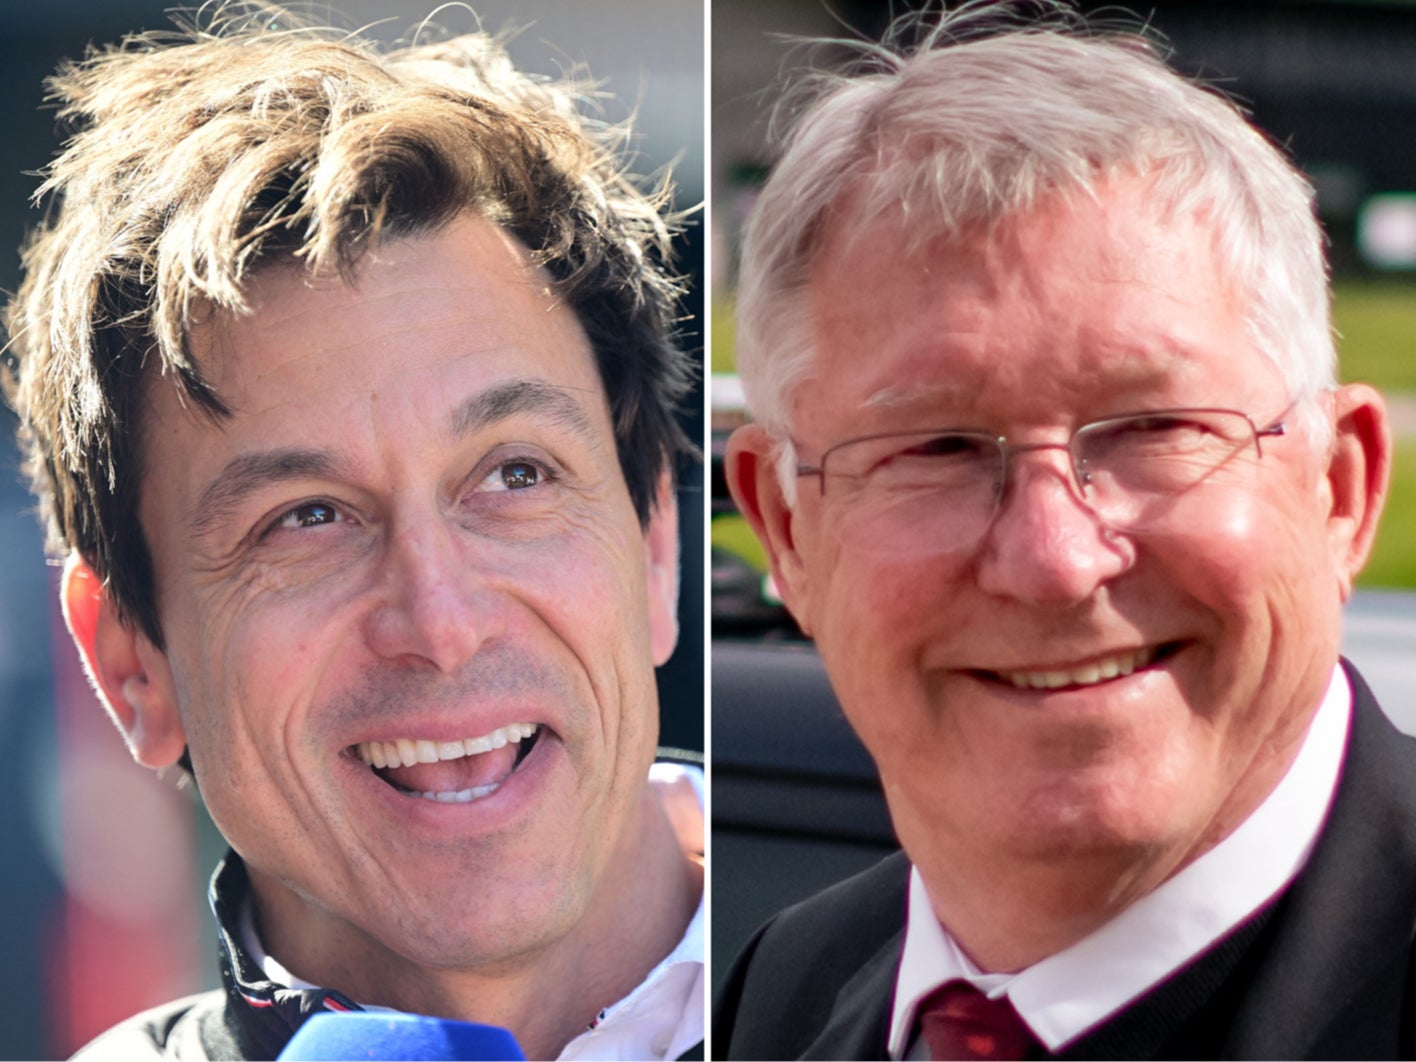 Toto Wolff has studied Manchester United after Sir Alex Ferguson’s exit